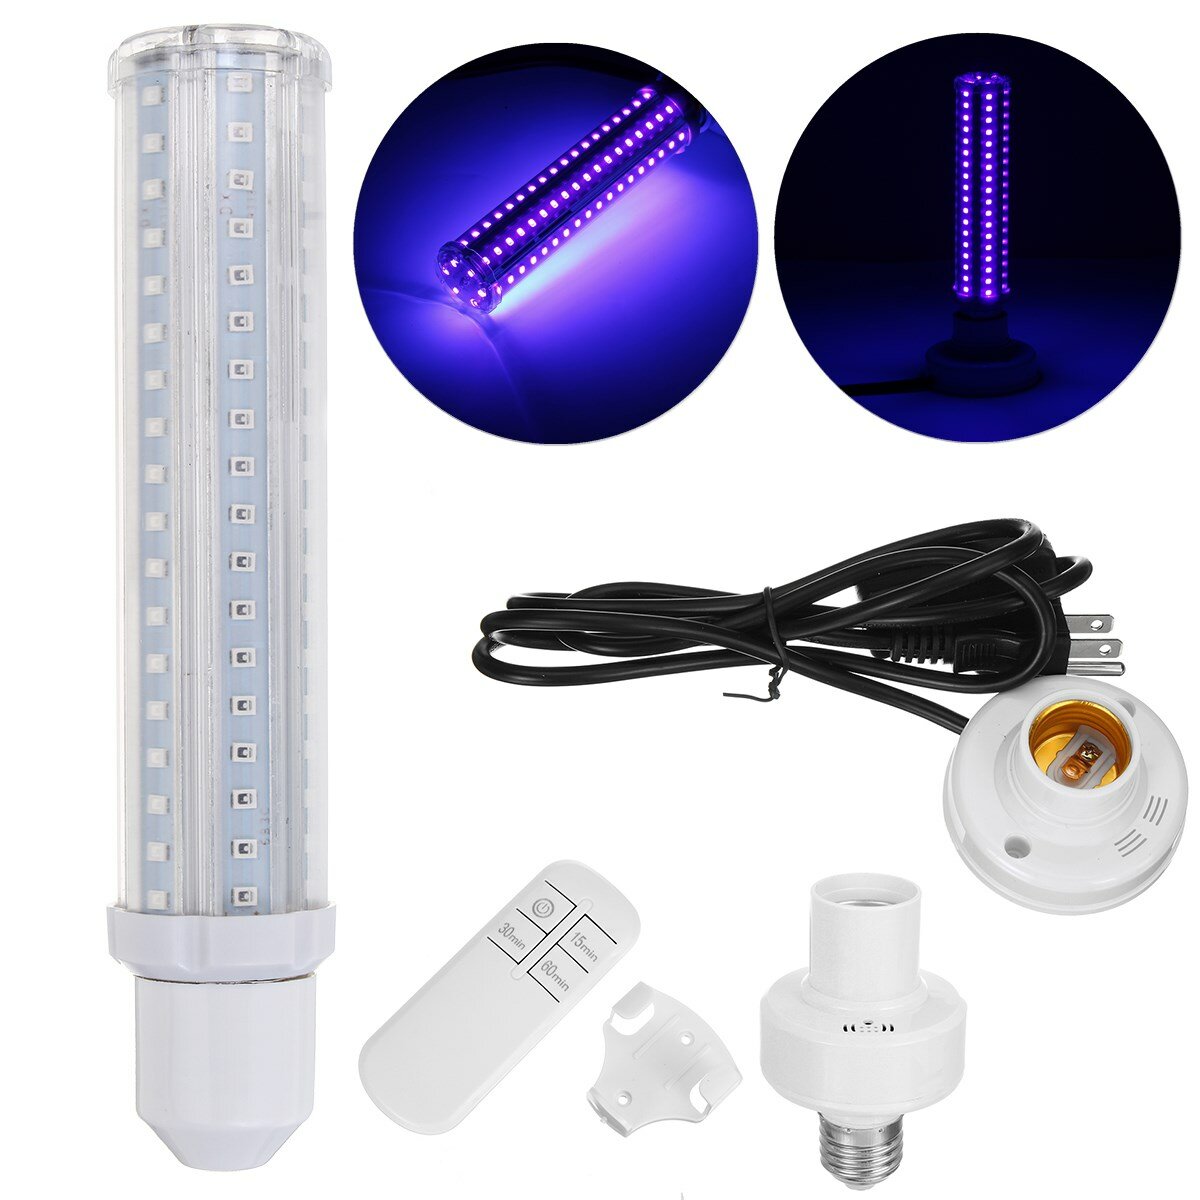 395nm LED UV Germicidal Lamp 85-265V 30W E27 Disinfection Light Bulb + Socket with Switch US Plug + Remote Control